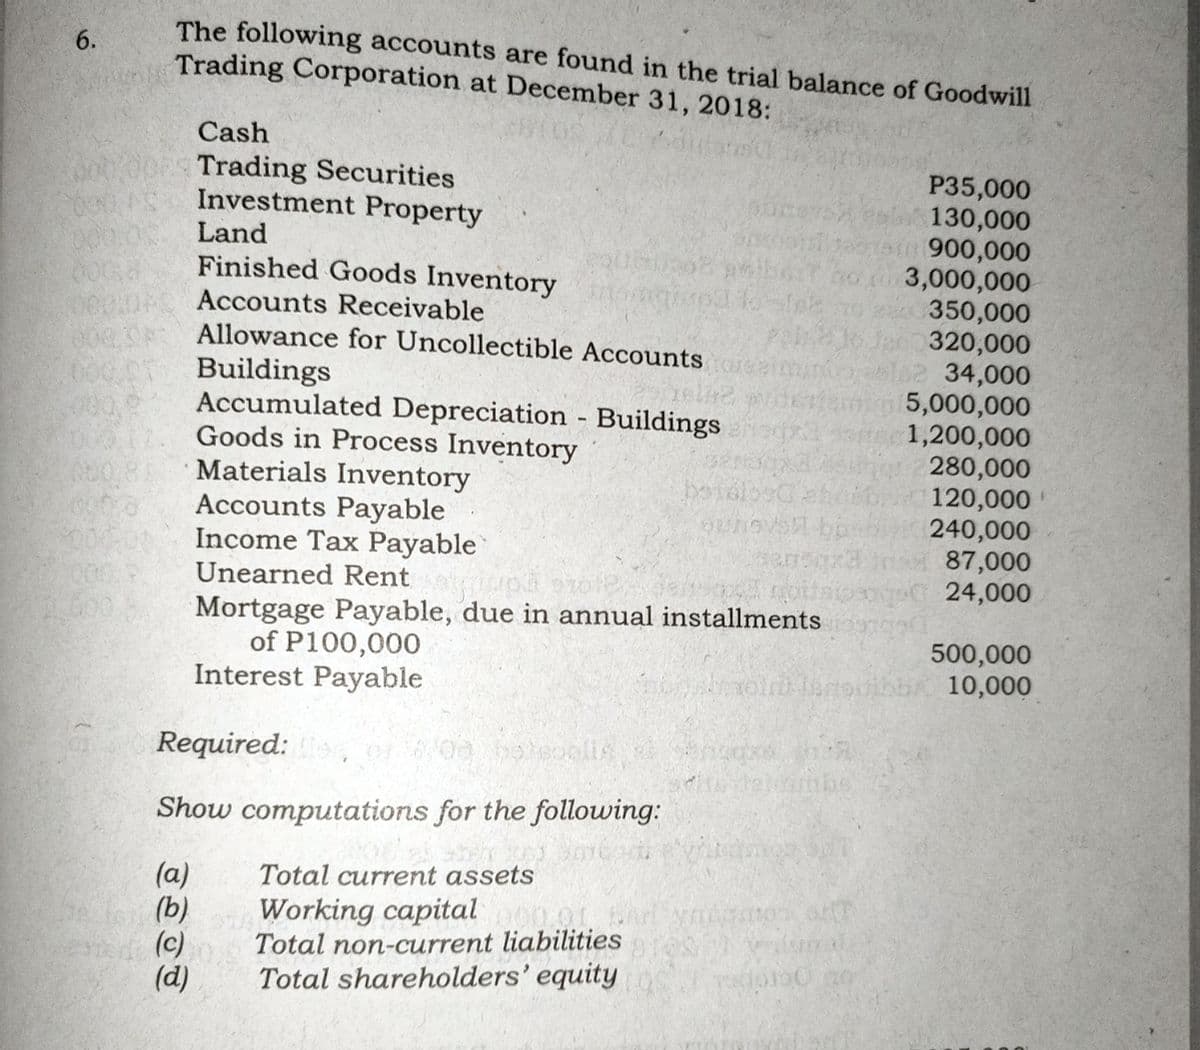 6.
The following accounts are found in the trial balance of Goodwill
Trading Corporation at December 31, 2018:
otro
00003 Land
Cash
Trading Securities
Investment Property
(c)
(d)
Finished Goods Inventory
Accounts Receivable
Allowance for Uncollectible Accounts
Buildings
Accumulated Depreciation - Buildings
Goods in Process Inventory
Materials Inventory
Accounts Payable
Income Tax Payable
Required:
Show computations for the following:
(a)
Total current assets
(b)
Working capital
0.01 BAR
Total non-current liabilities
Total shareholders' equity
bo161000
DUNOVSH
sans
Unearned Rent
Mortgage Payable, due in annual installments
of P100,000
Interest Payable
aloin togodih
mon a
Todoro
P35,000
130,000
900,000
3,000,000
350,000
320,000
34,000
5,000,000
1,200,000
280,000
120,000
240,000
87,000
24,000
500,000
10,000